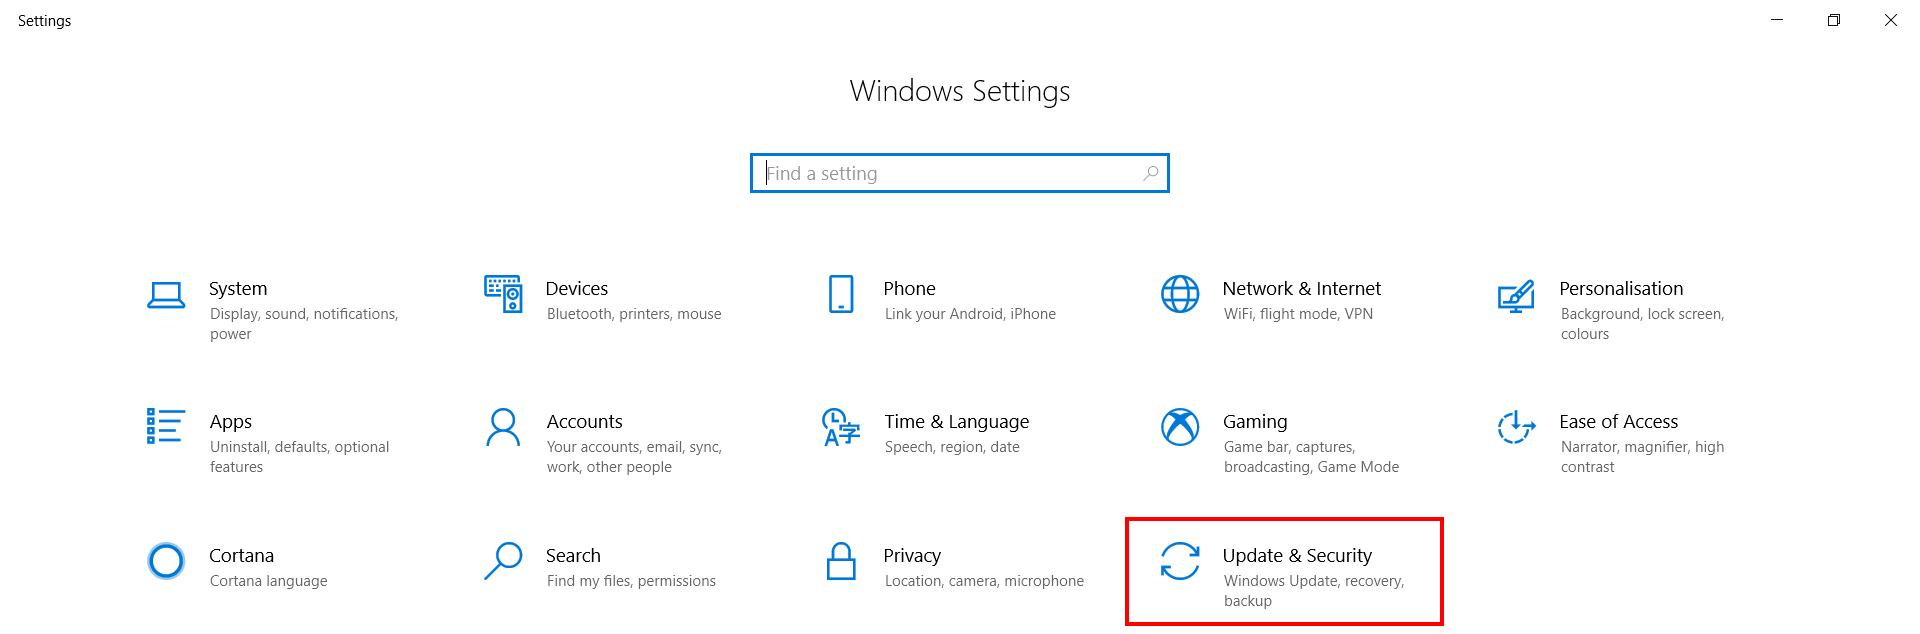 “Update & Security” section in Windows Settings